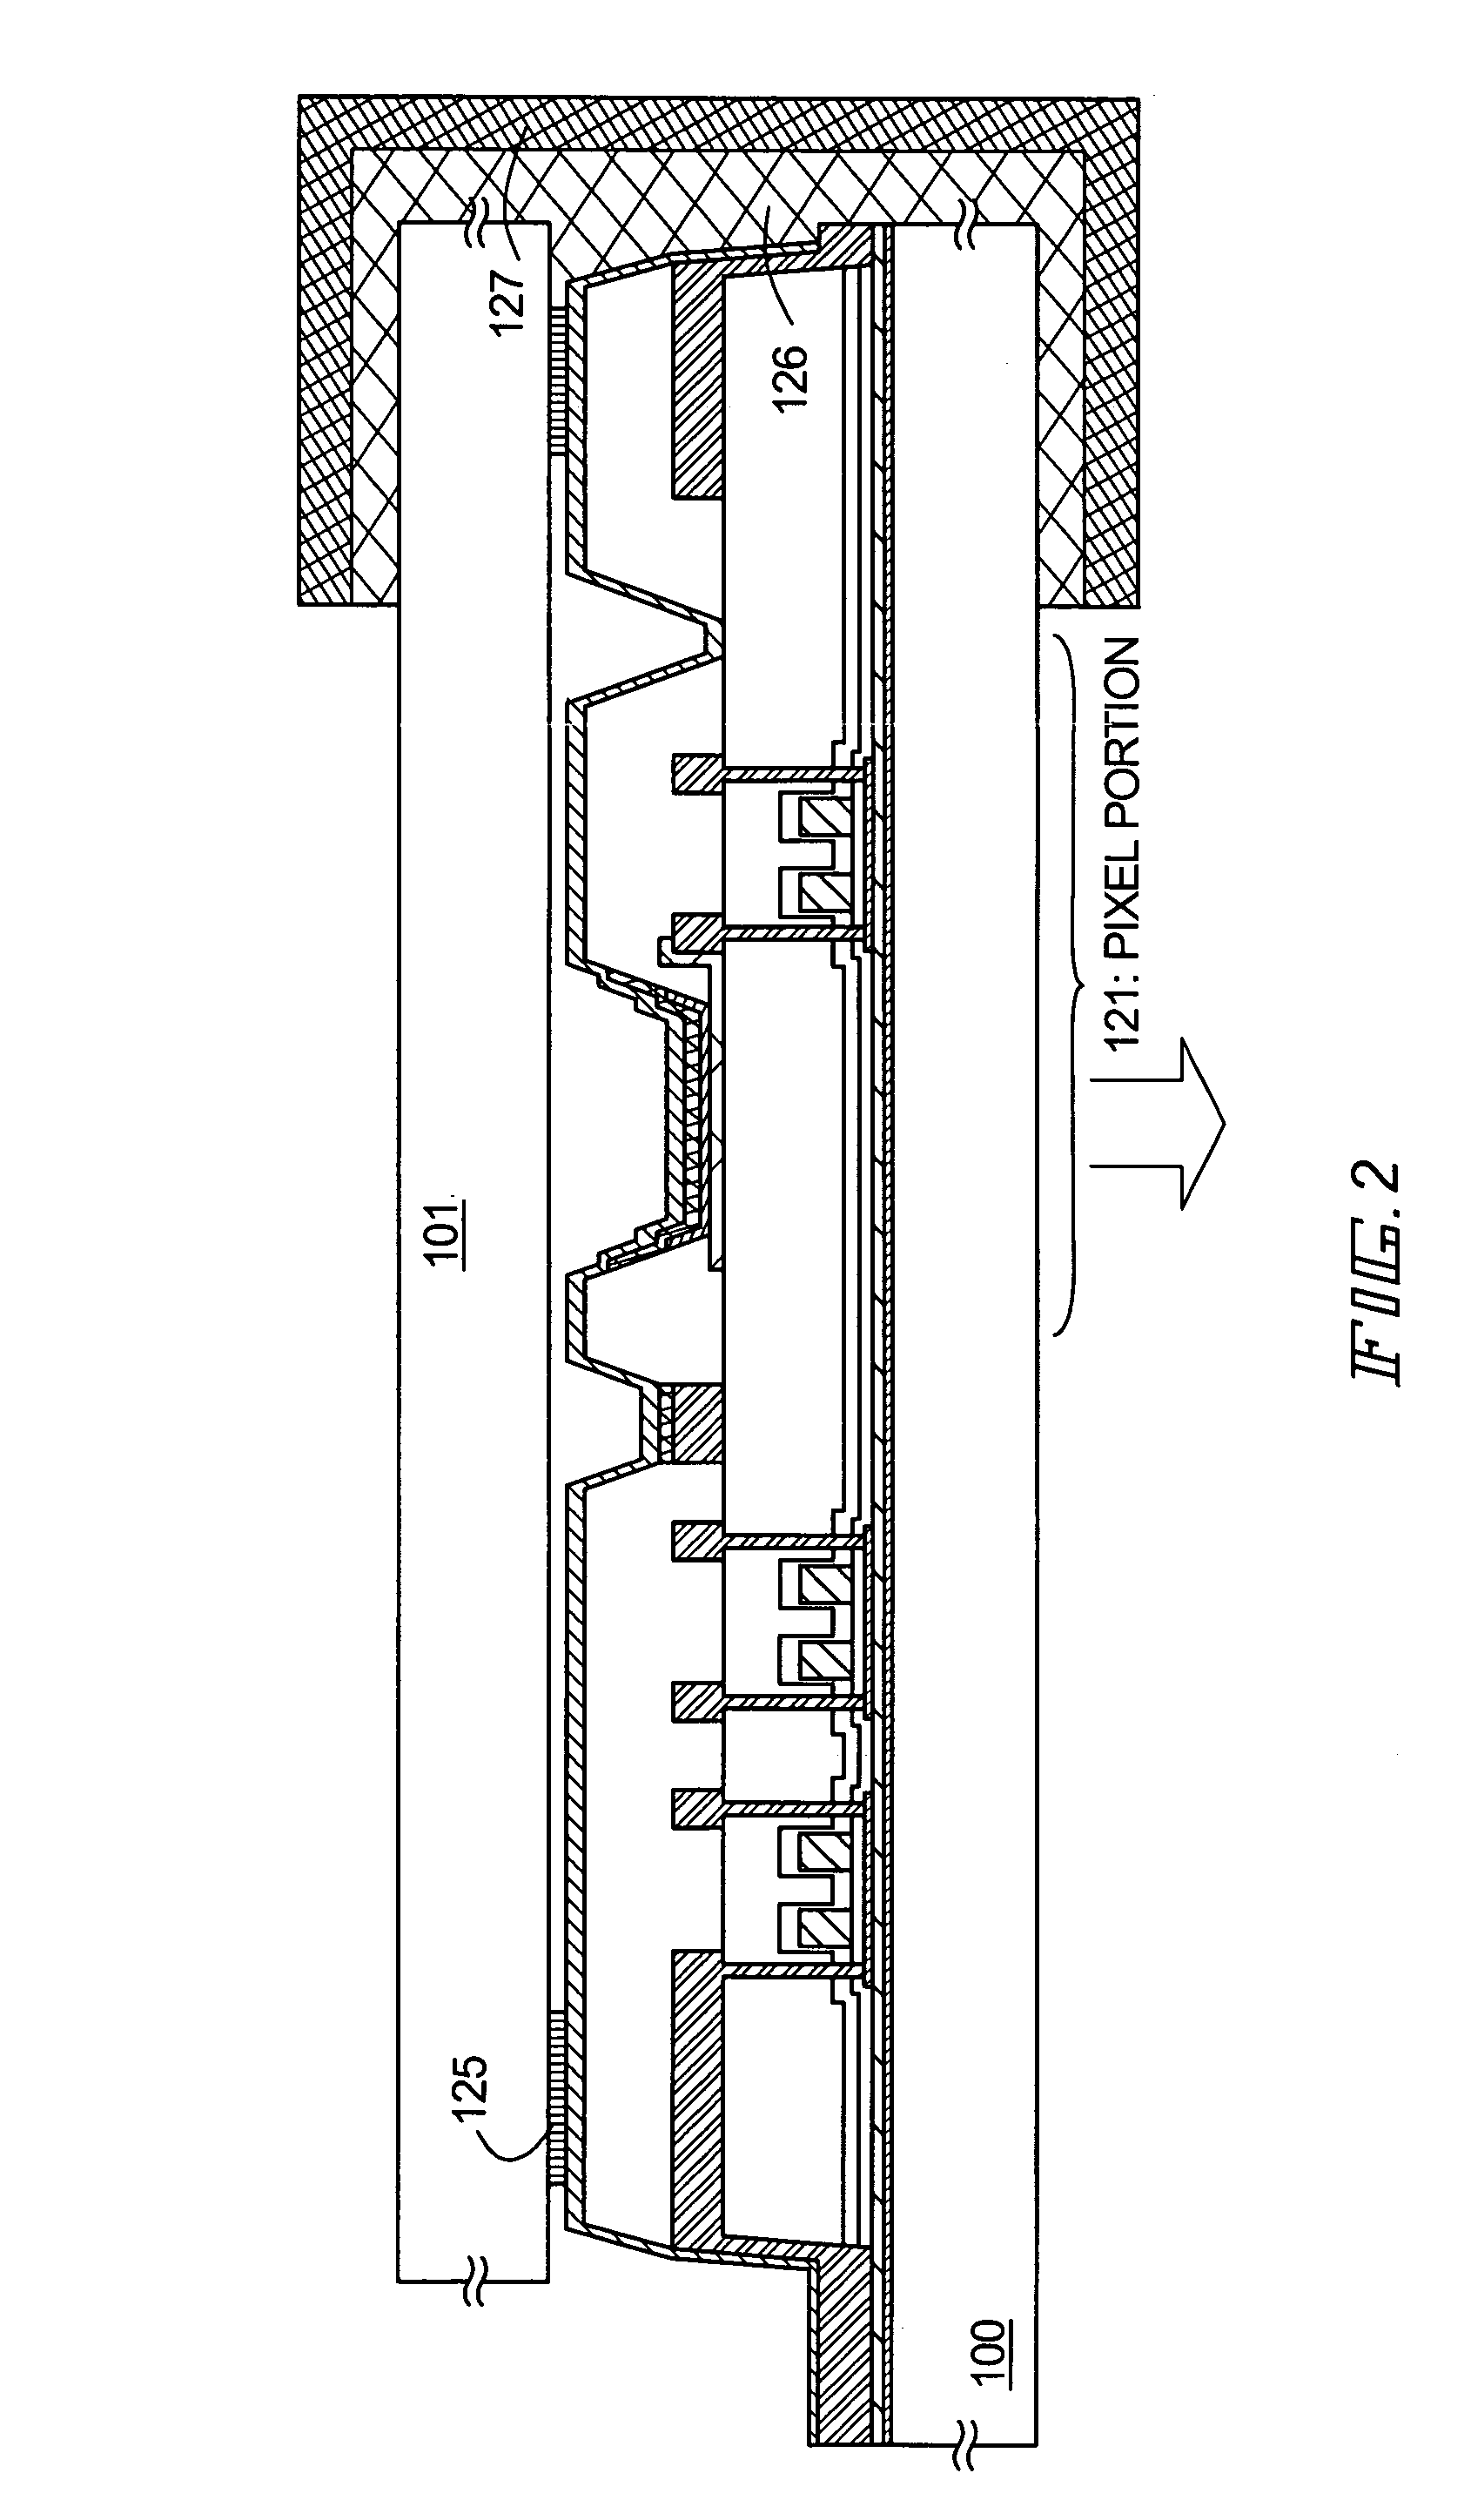 Display device with sealing structure for protecting organic light emitting element